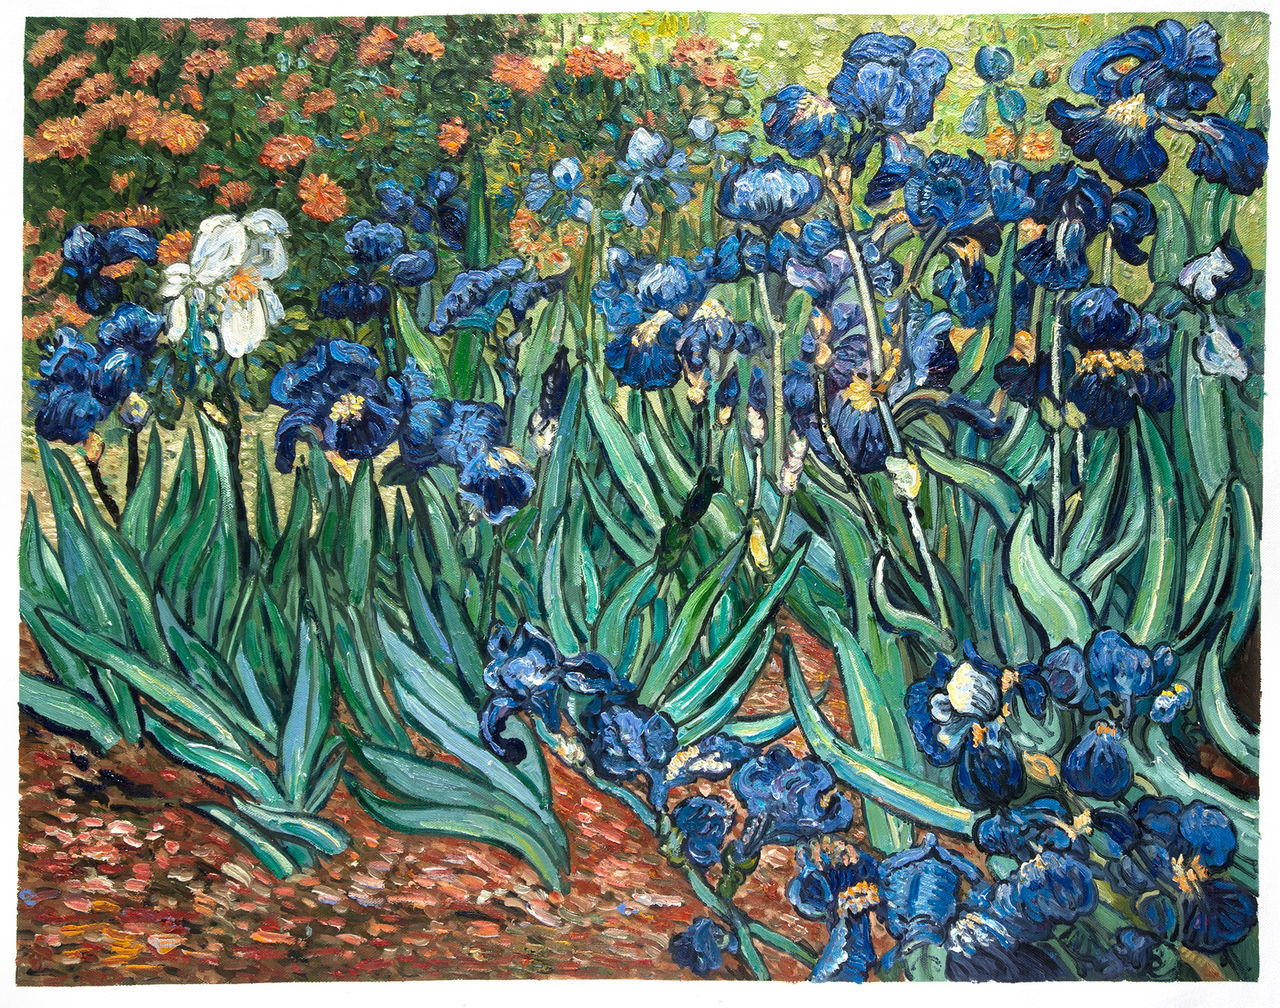 Irises Van Gogh Reproduction, hand-painted in oil on canvas